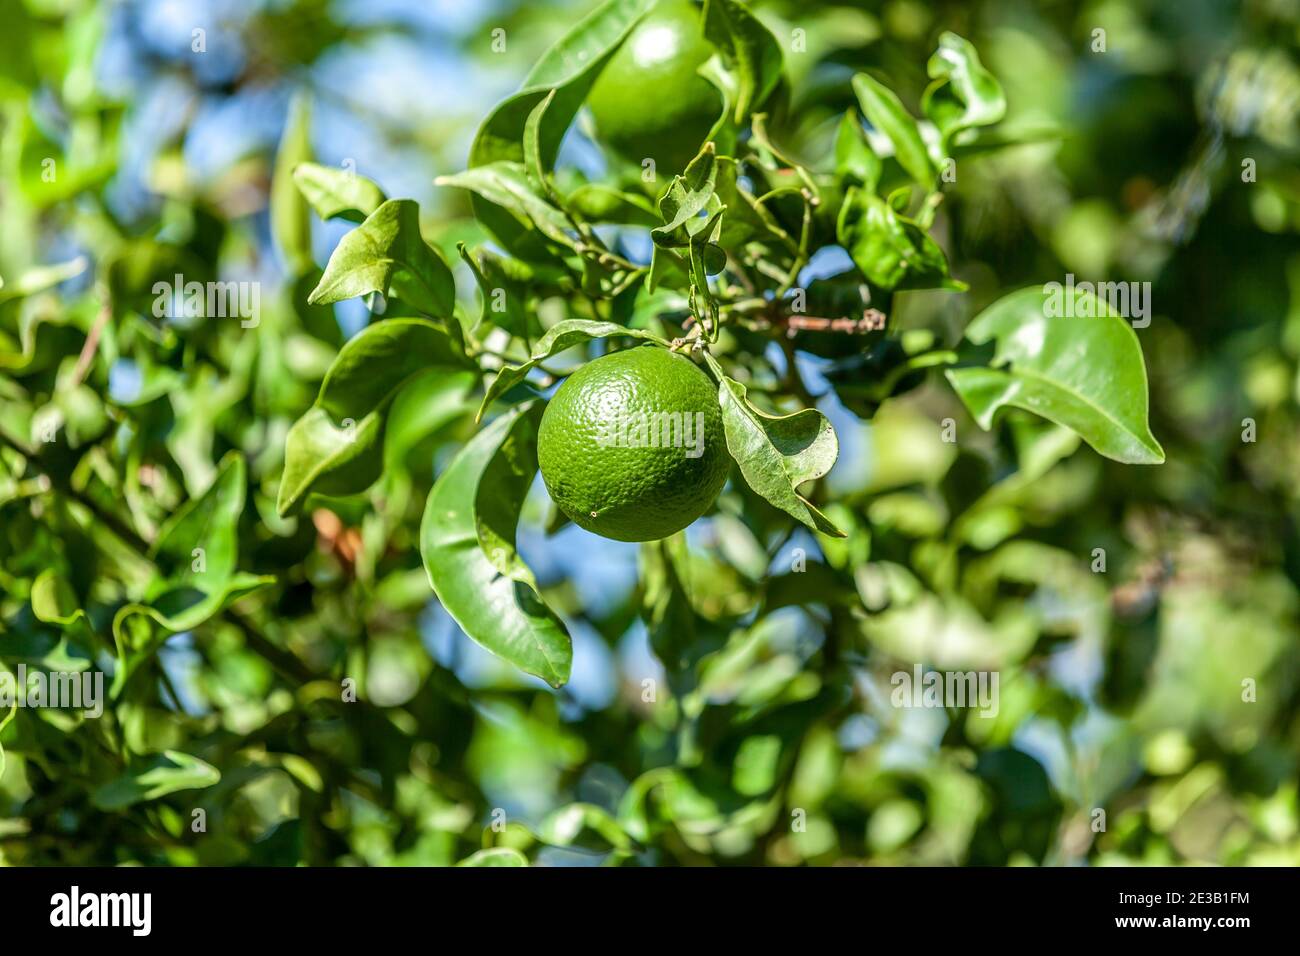 A fresh and healthy orange fruit growing on a tree. Stock Photo